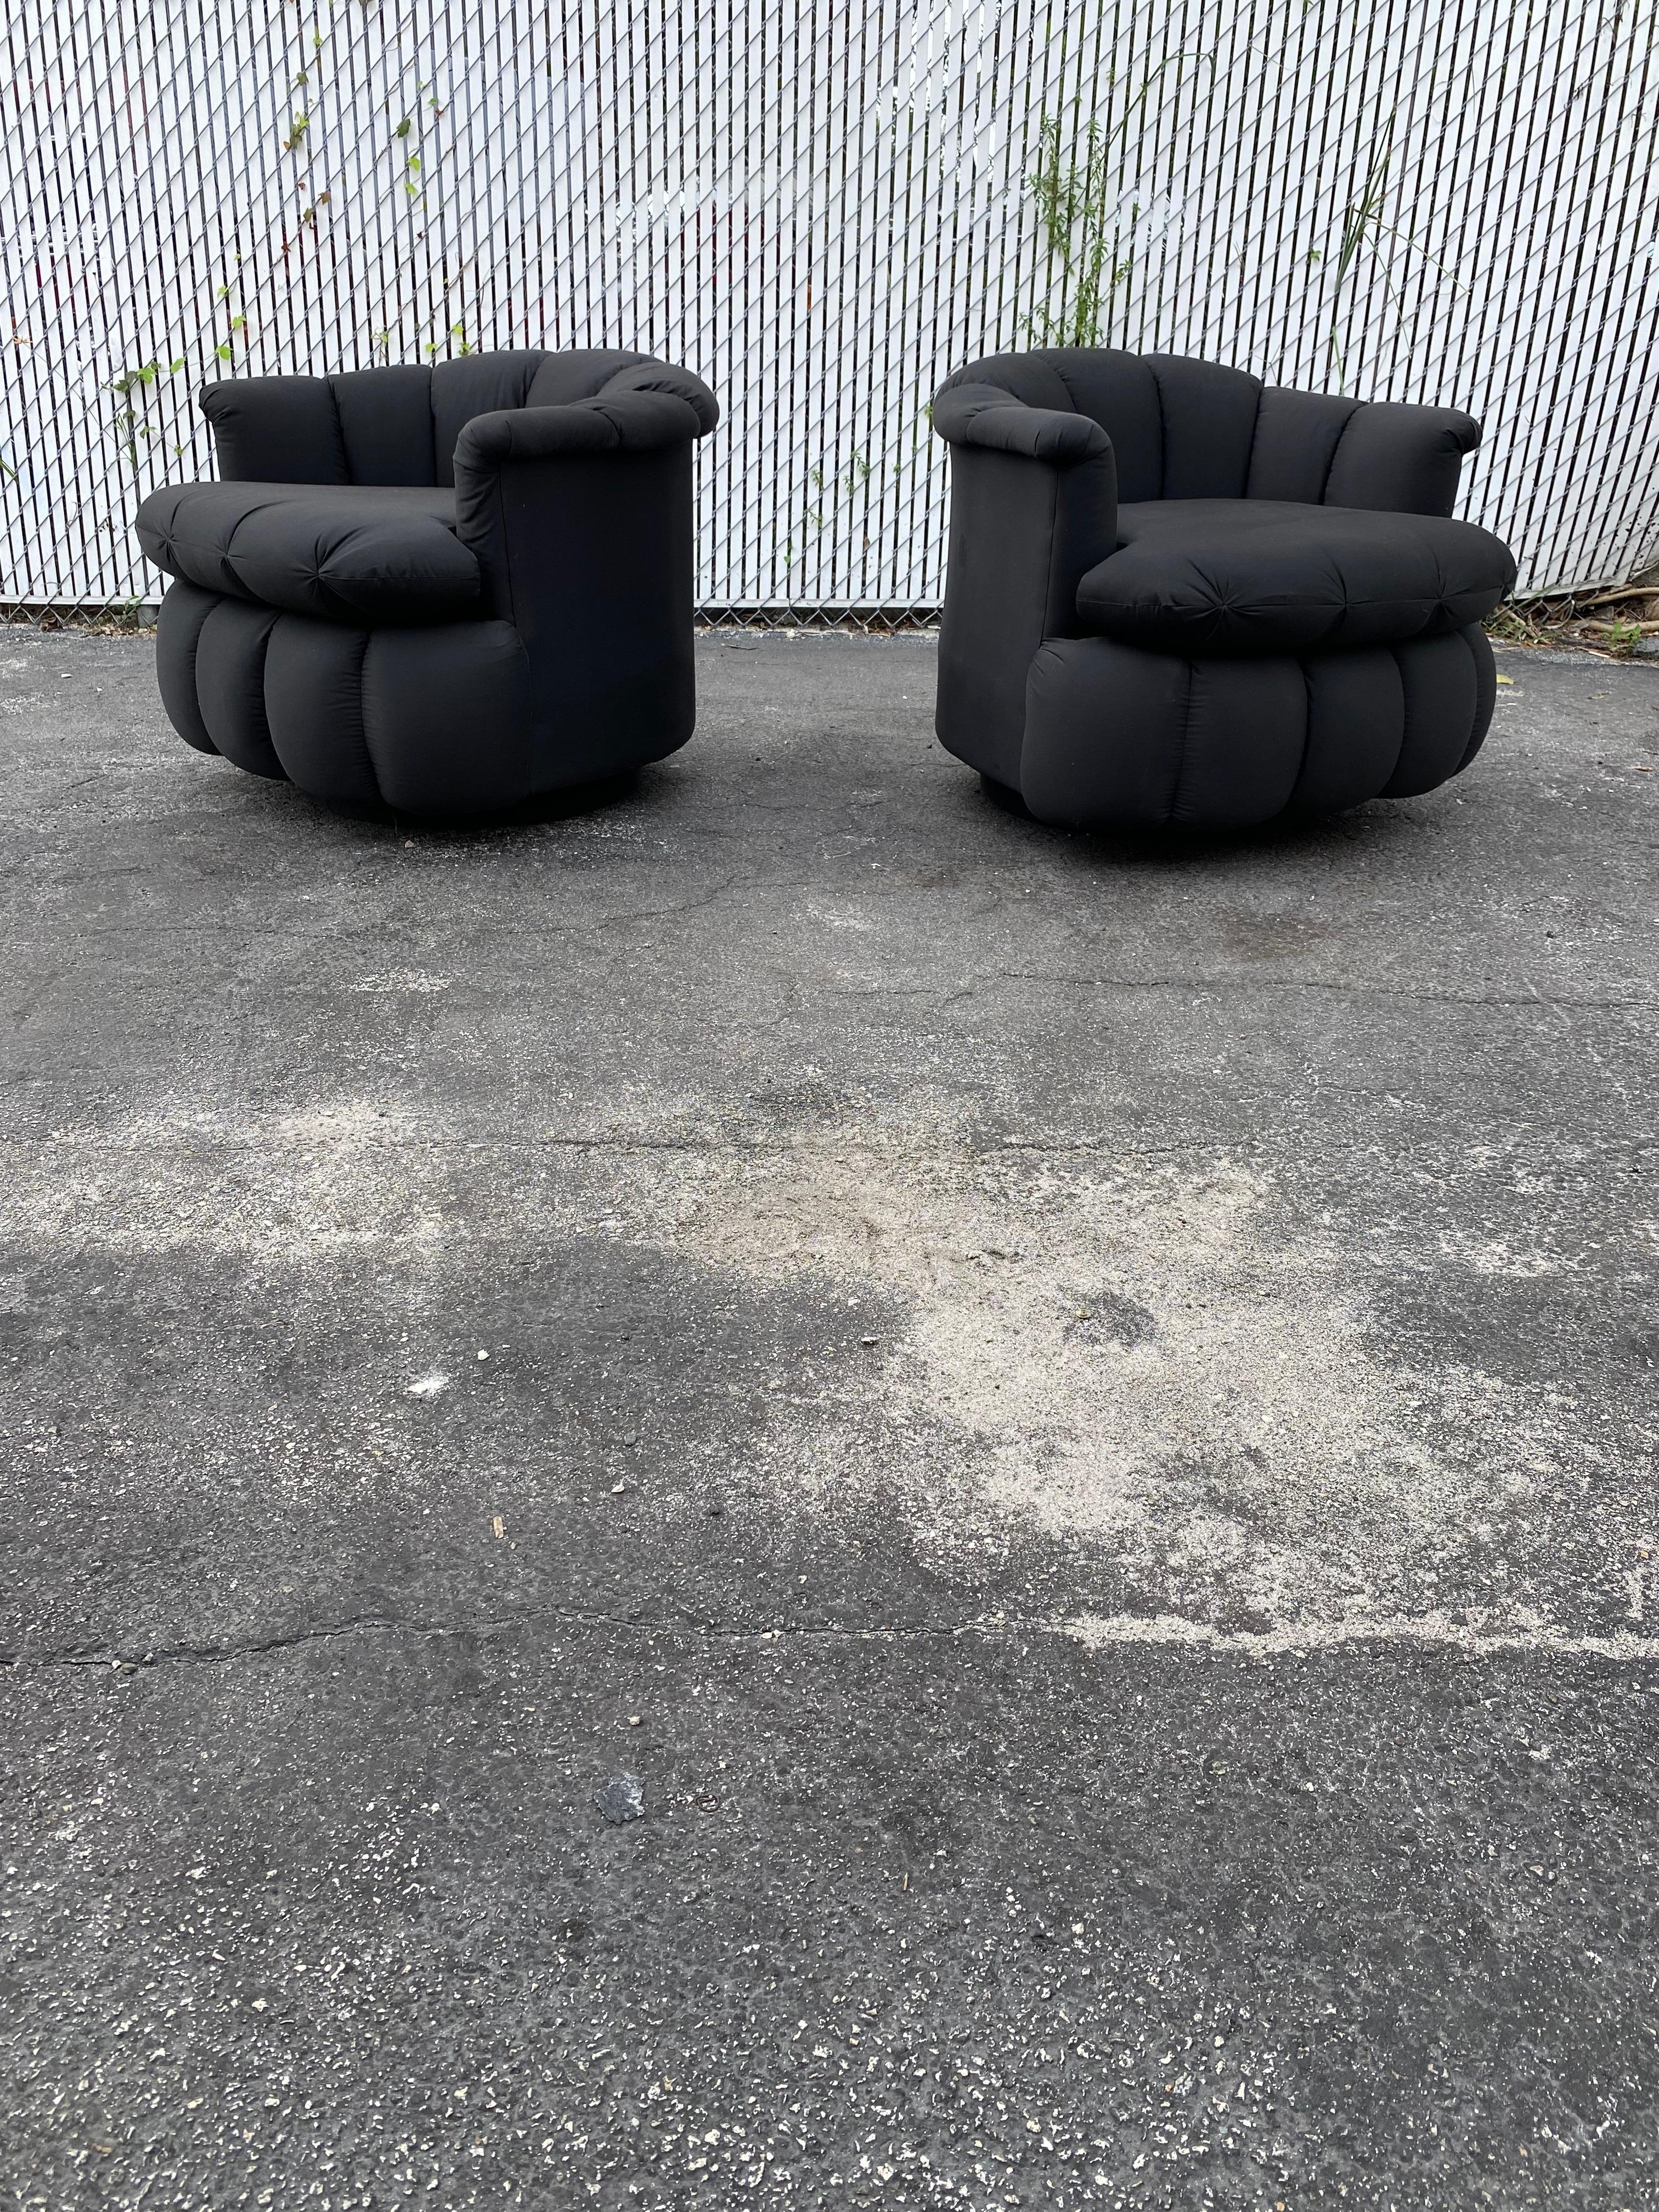 On offer on this occasion is one of the most stunning, swivel chairs you could hope to find. This is an ultra-rare opportunity to acquire what is, unequivocally, the best of the best, it being a most spectacular and beautifully-presented chairs.